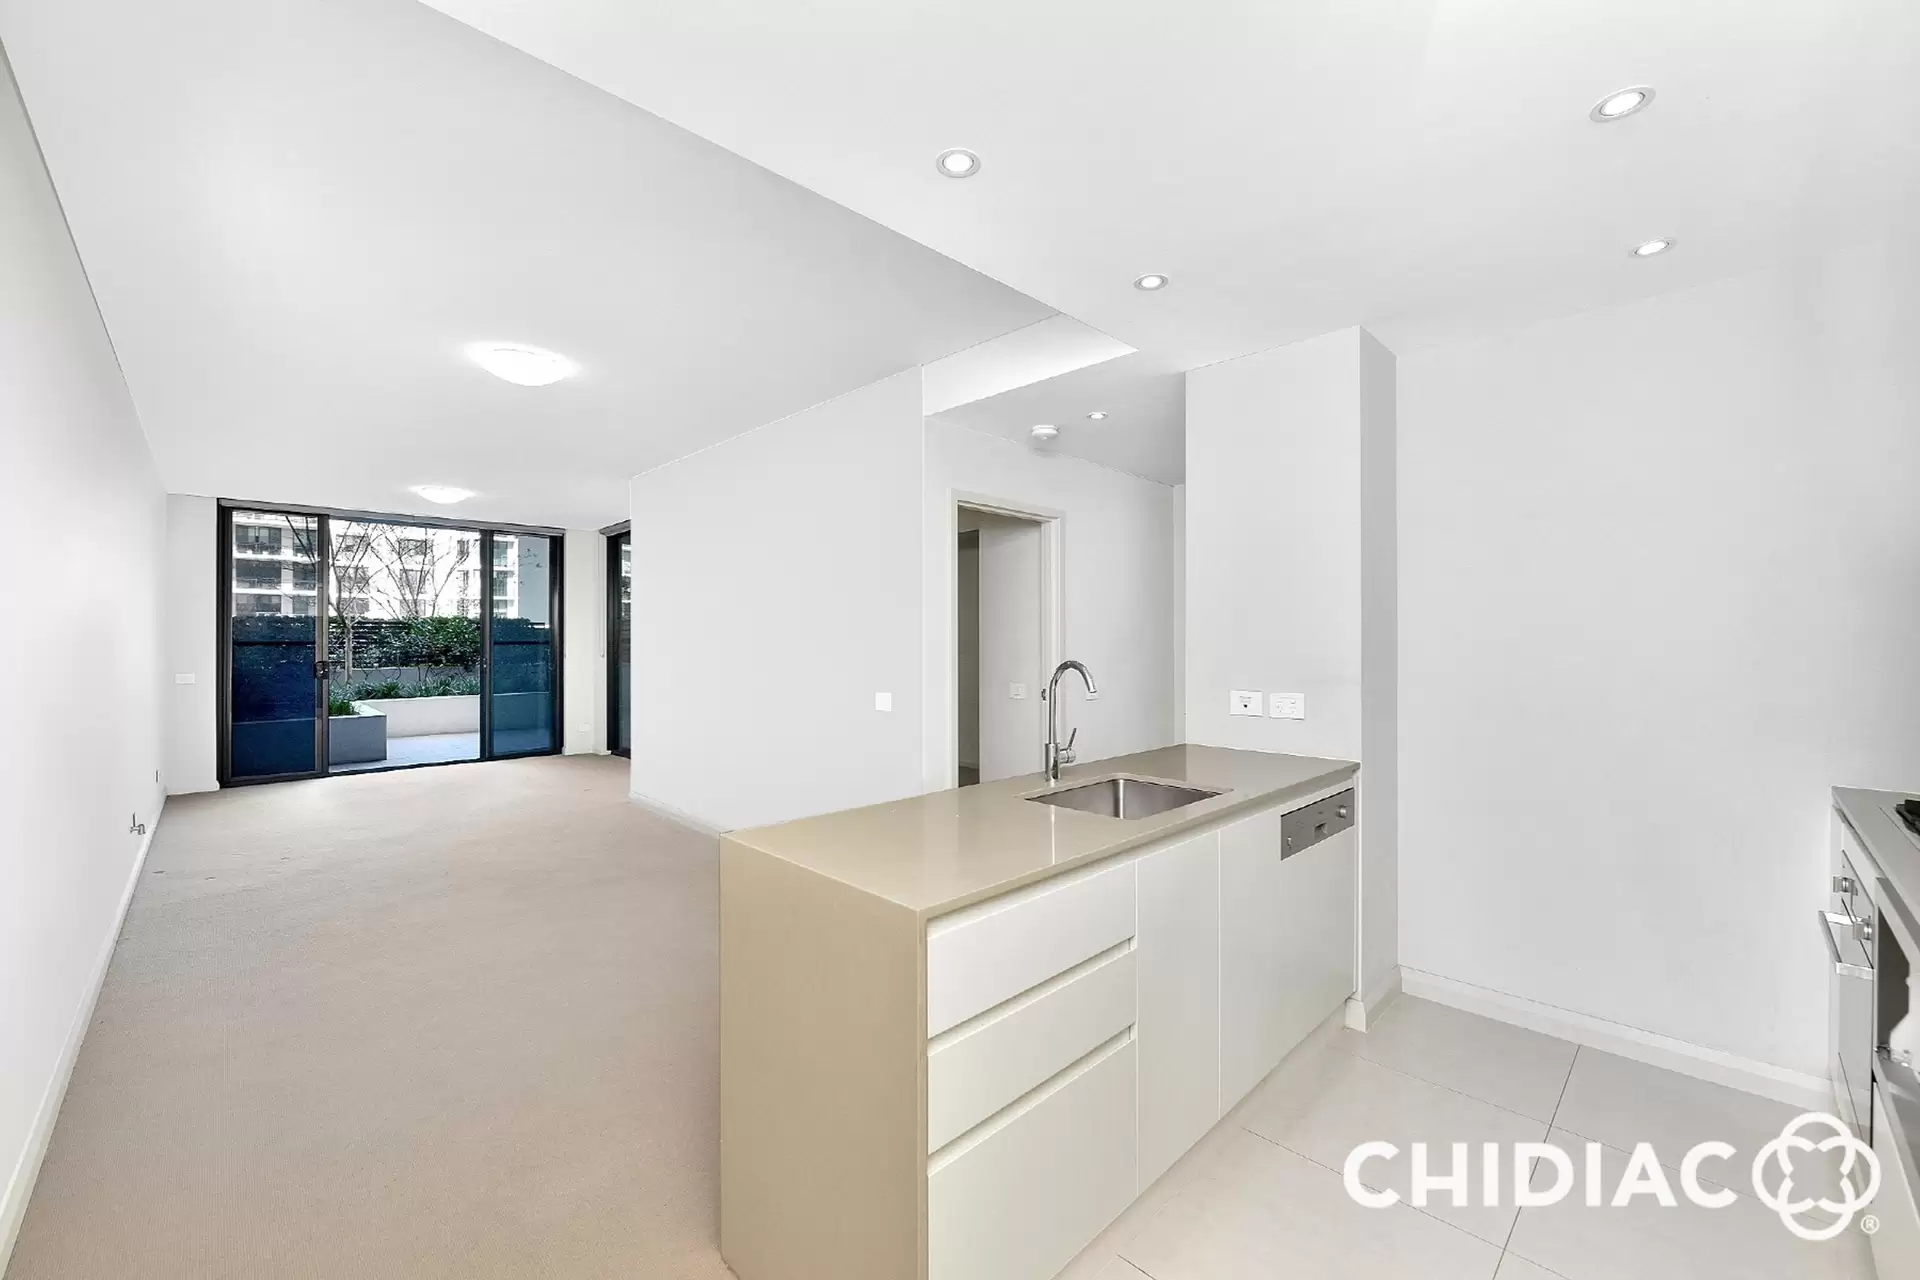 209/48 Amalfi Drive, Wentworth Point Leased by Chidiac Realty - image 1